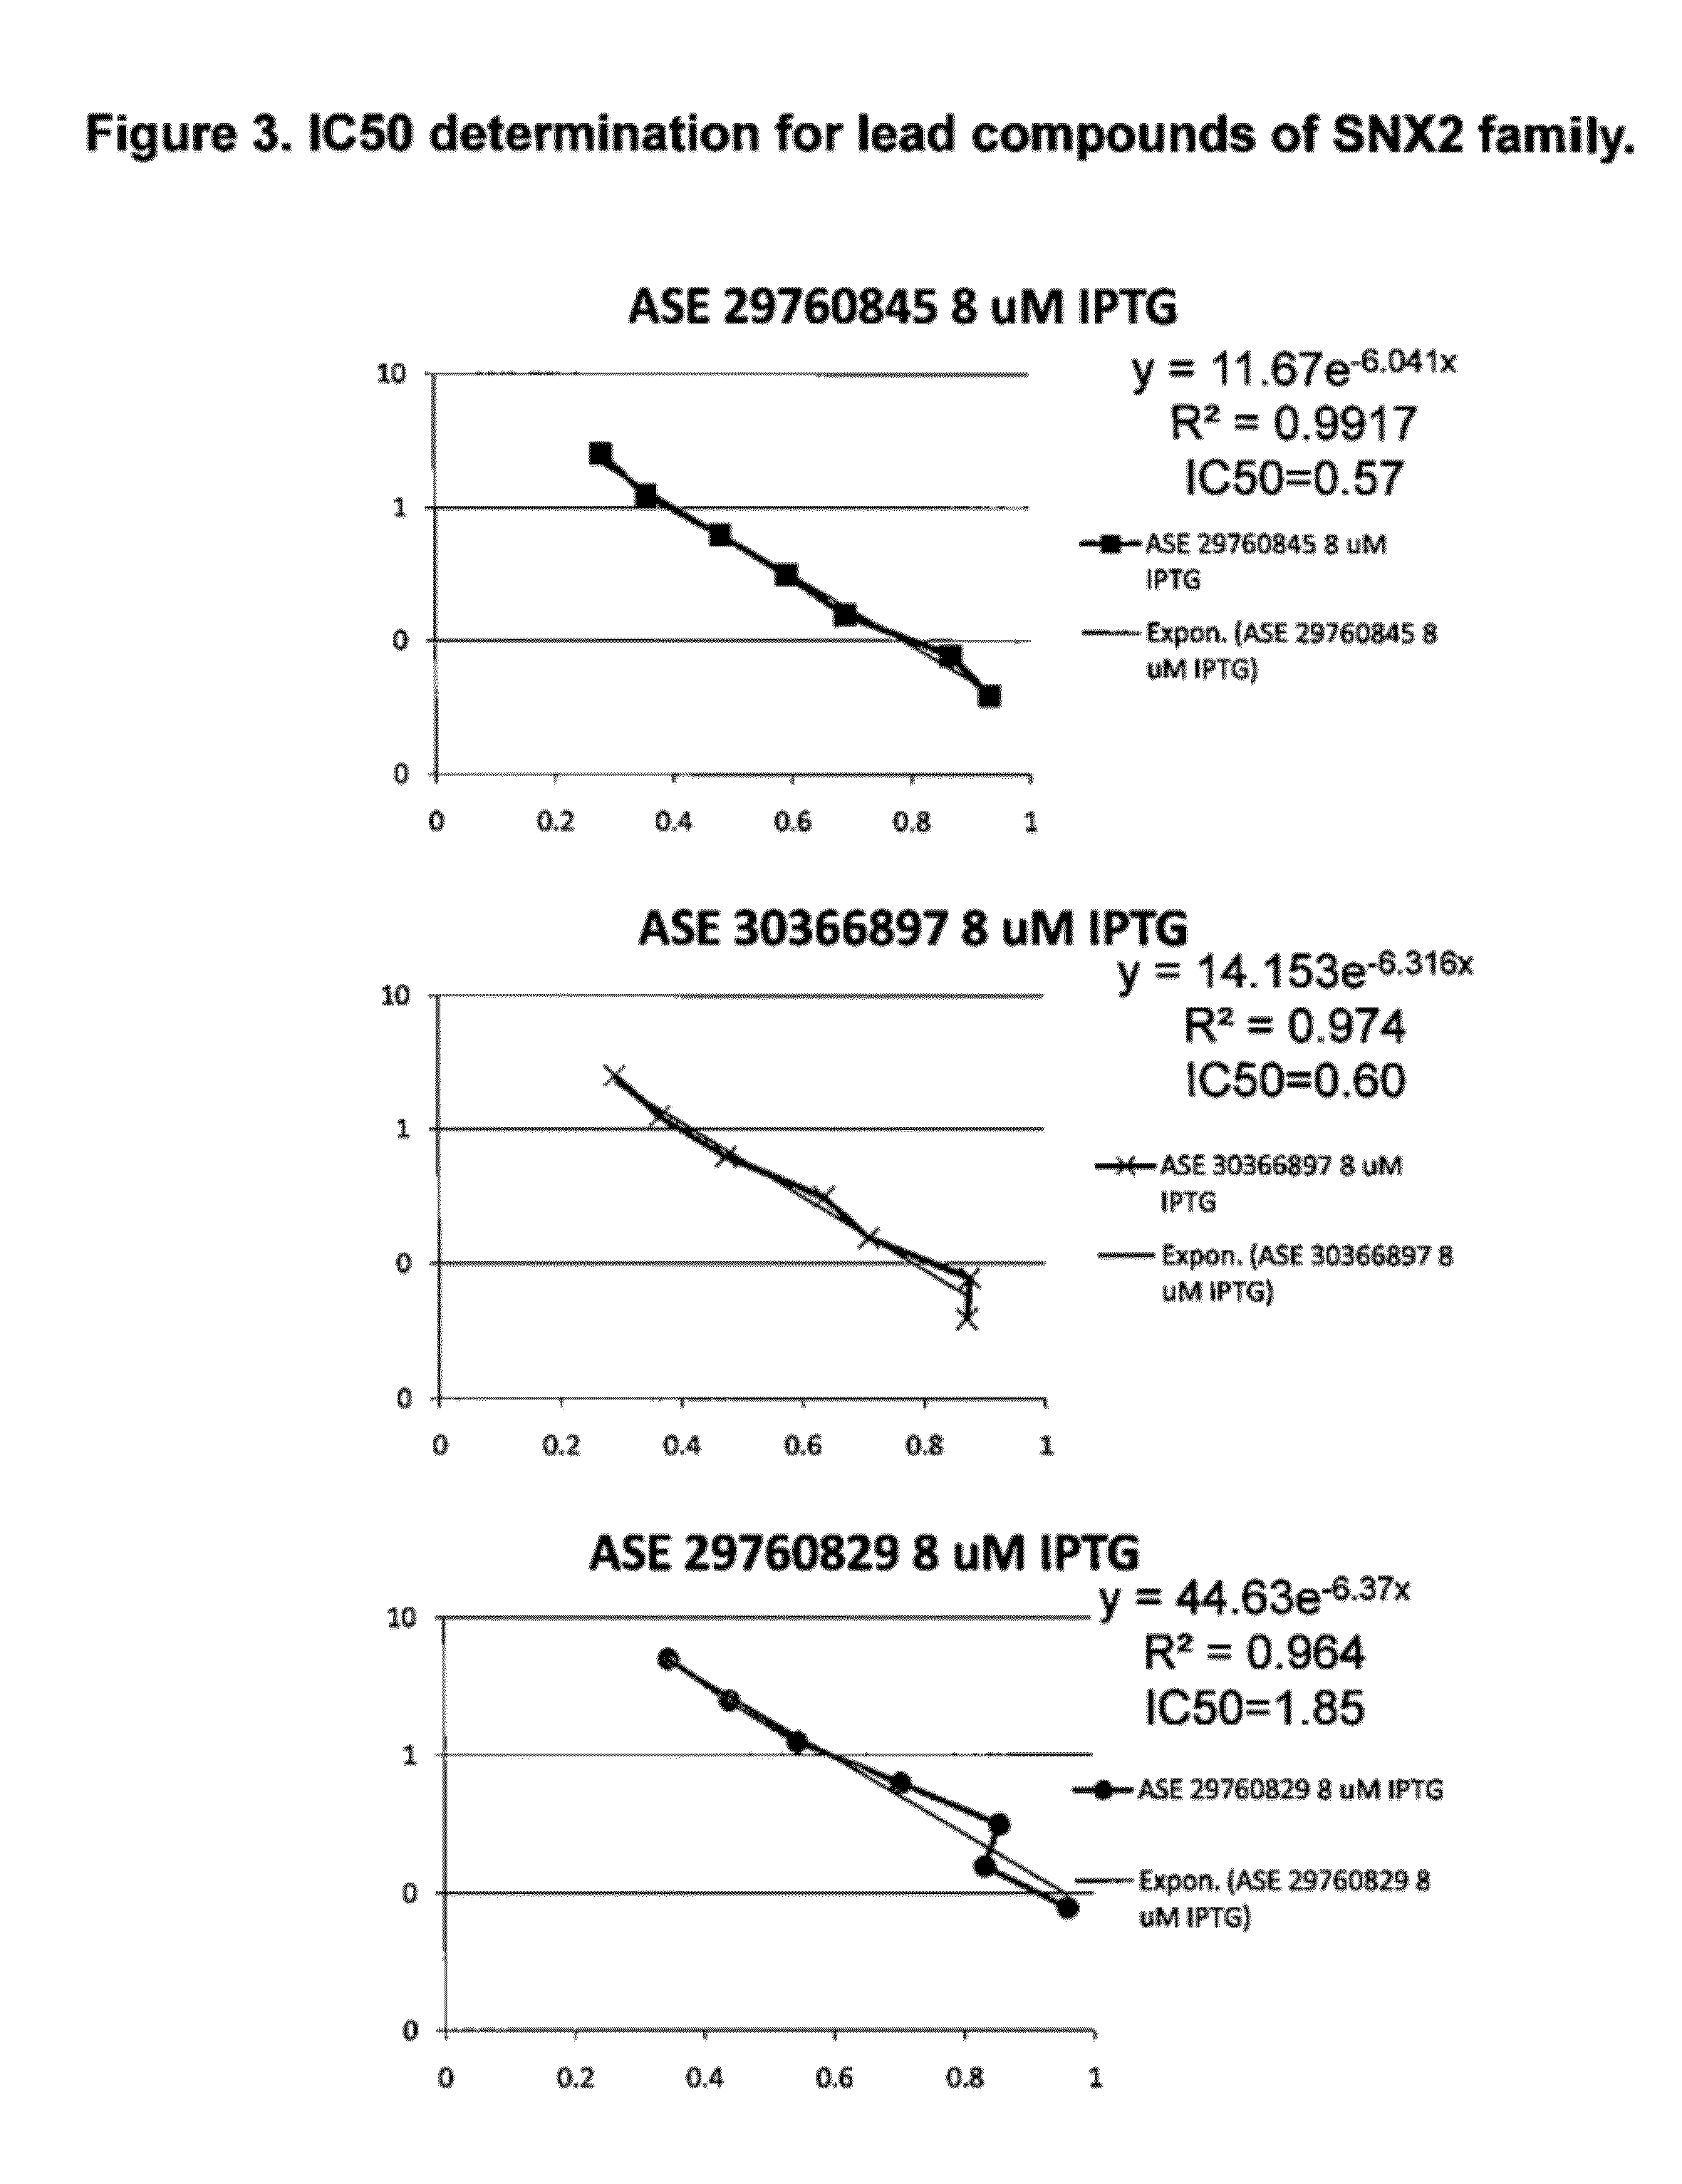 Cdki pathway inhibitors and uses thereof